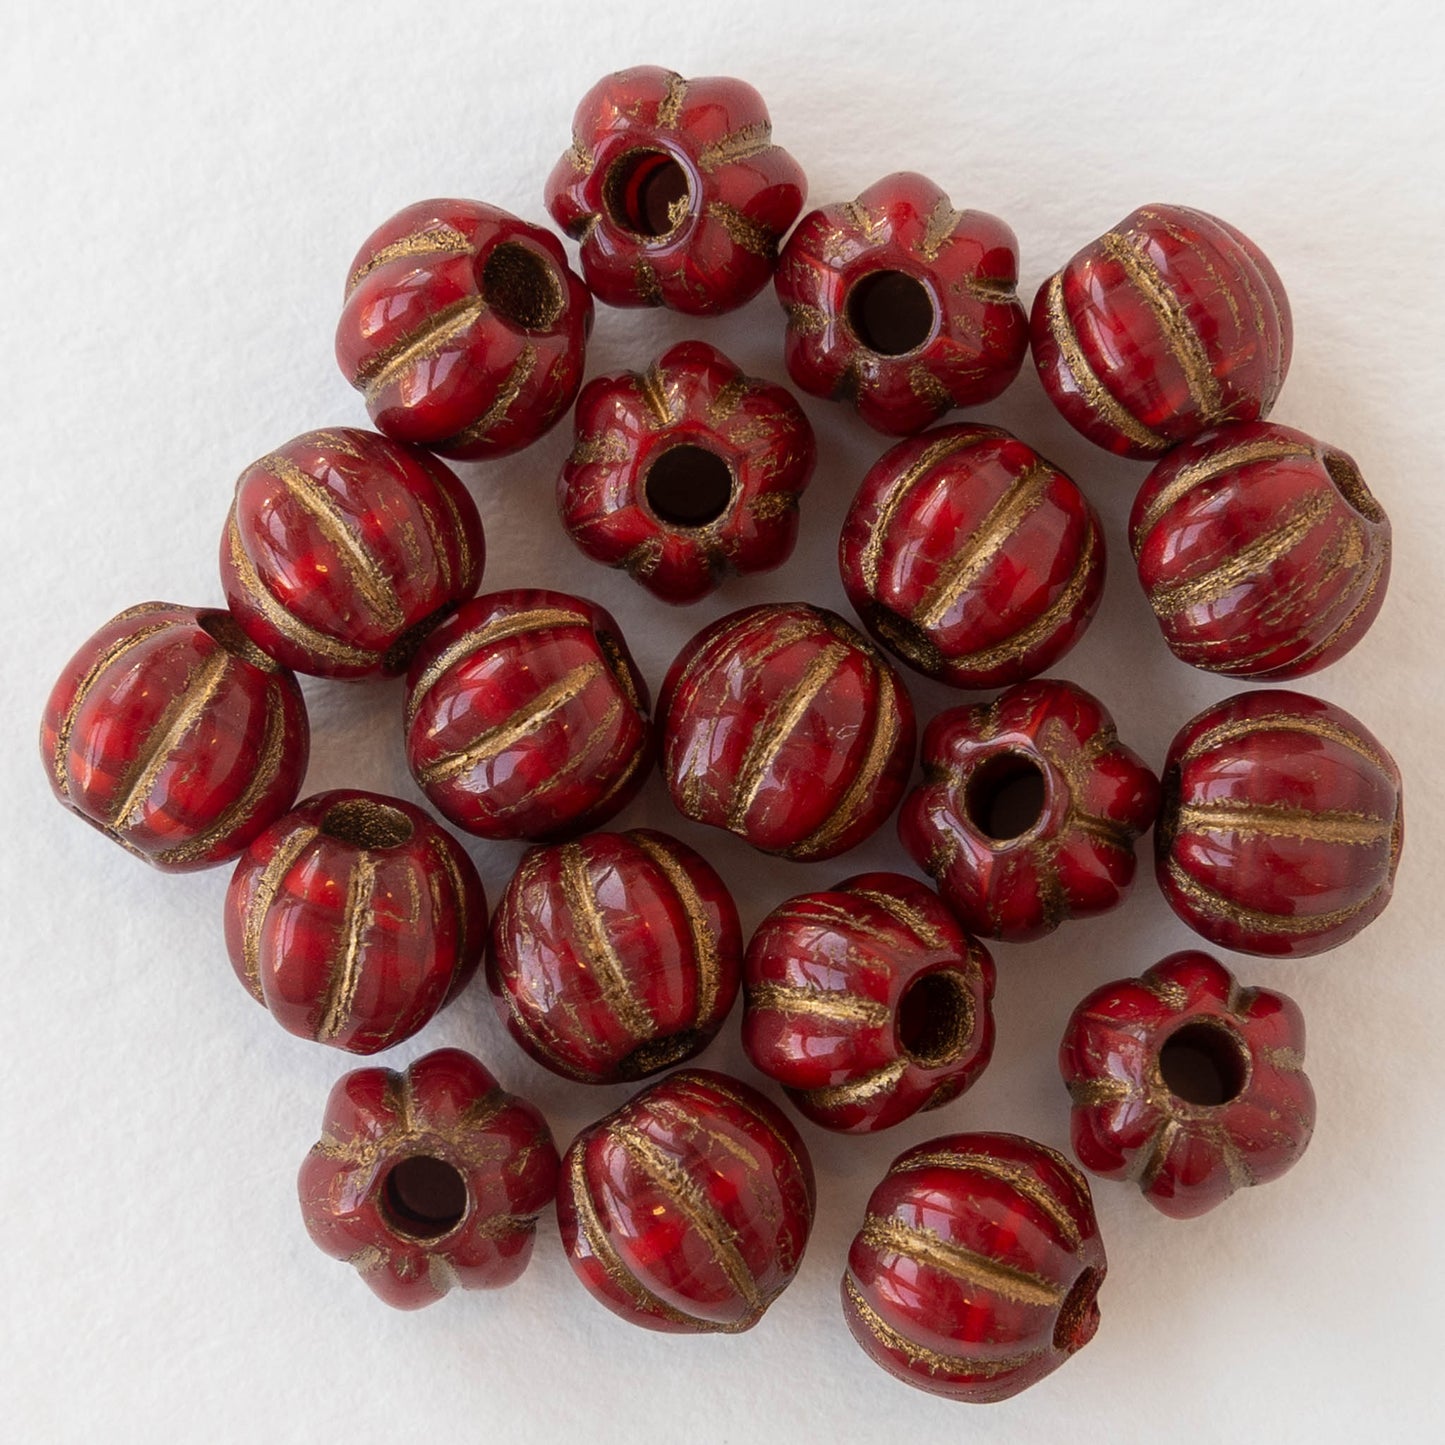 Load image into Gallery viewer, 8mm Melon Bead - Ruby Red with Bronze - 10 Beads
